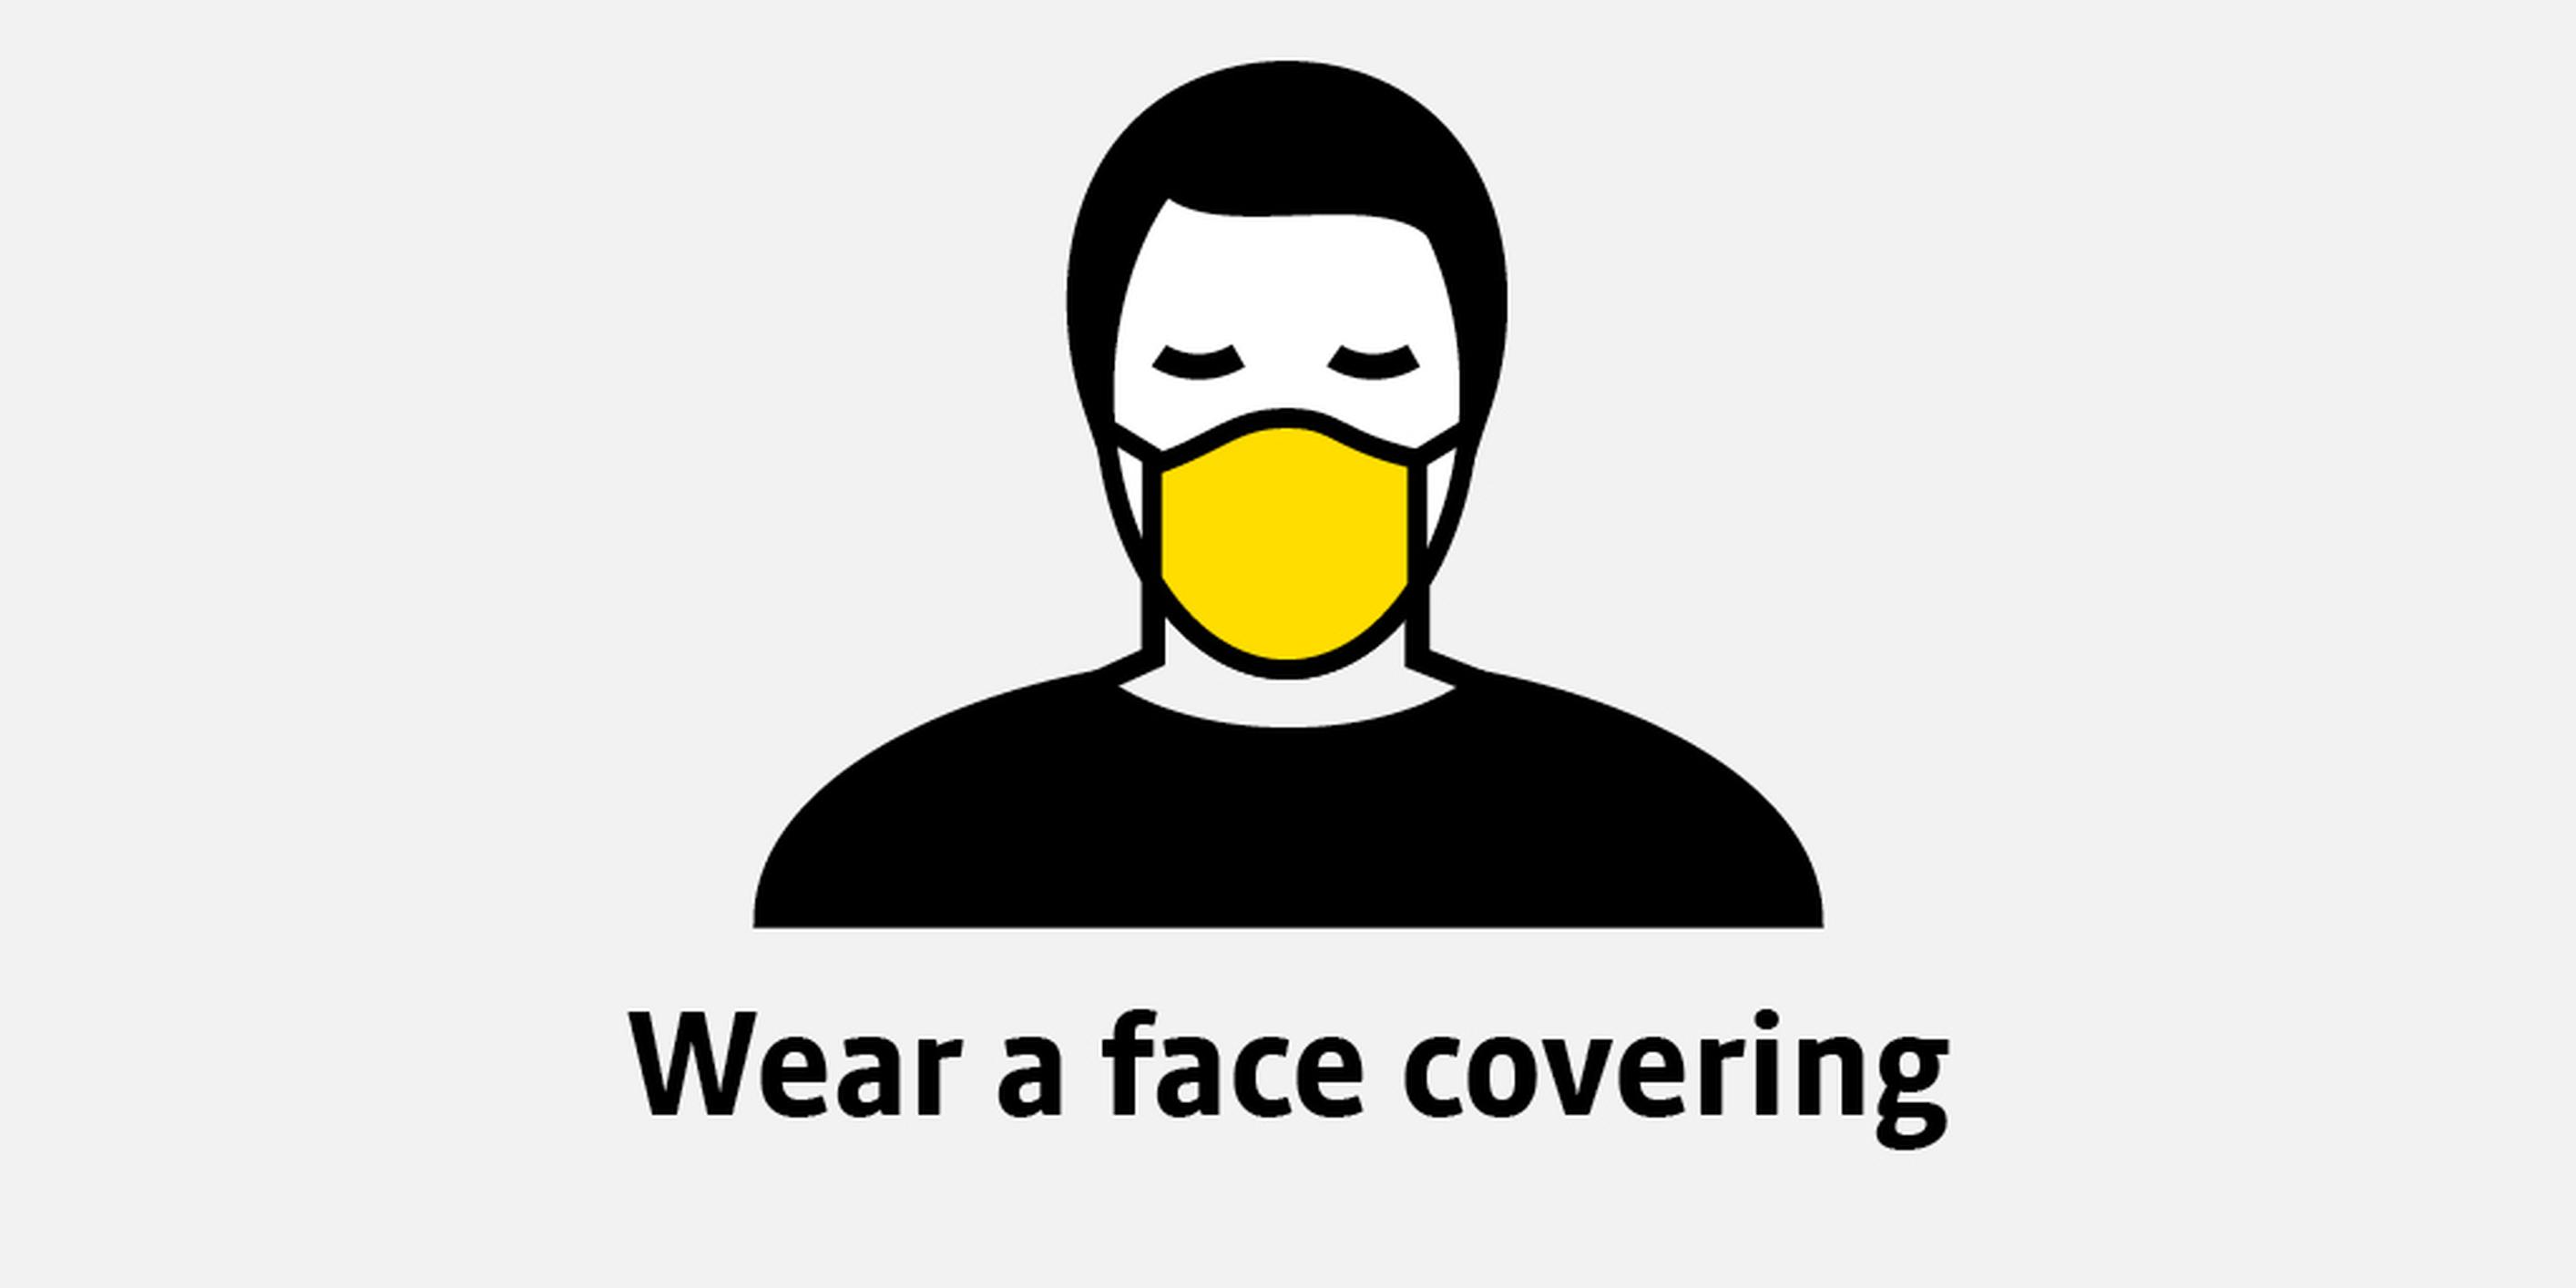 A Transport for Greater Manchester graphic promoting mask wearing